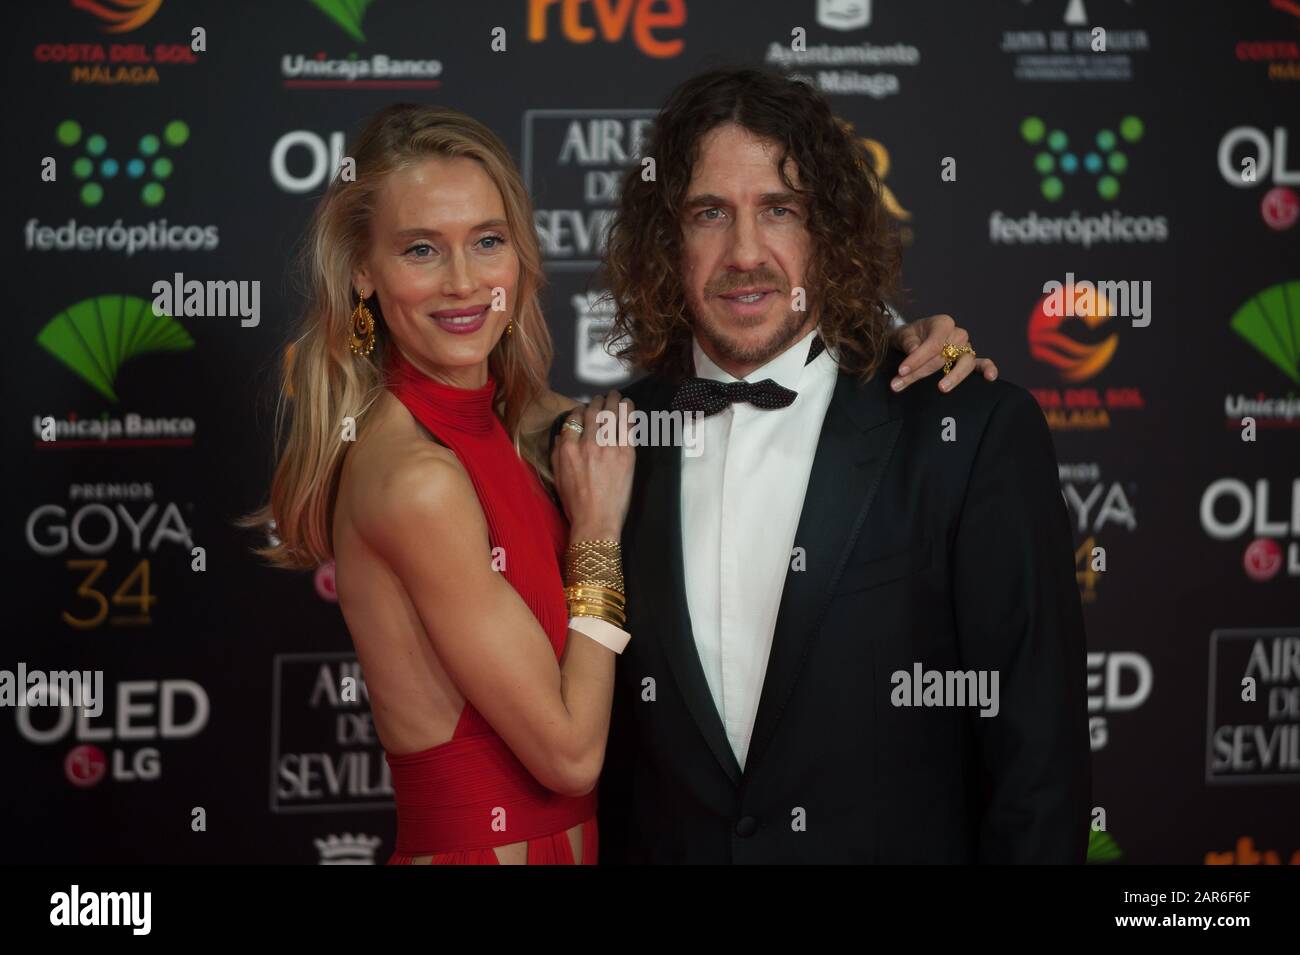 Spanish former footballer Carles Puyol poses with his partner model Vanesa Lorenzo attend the 34th edition of Spanish Film Academy's Goya Awards ceremony, at Jose Maria Martin Carpena sport palace. Stock Photo